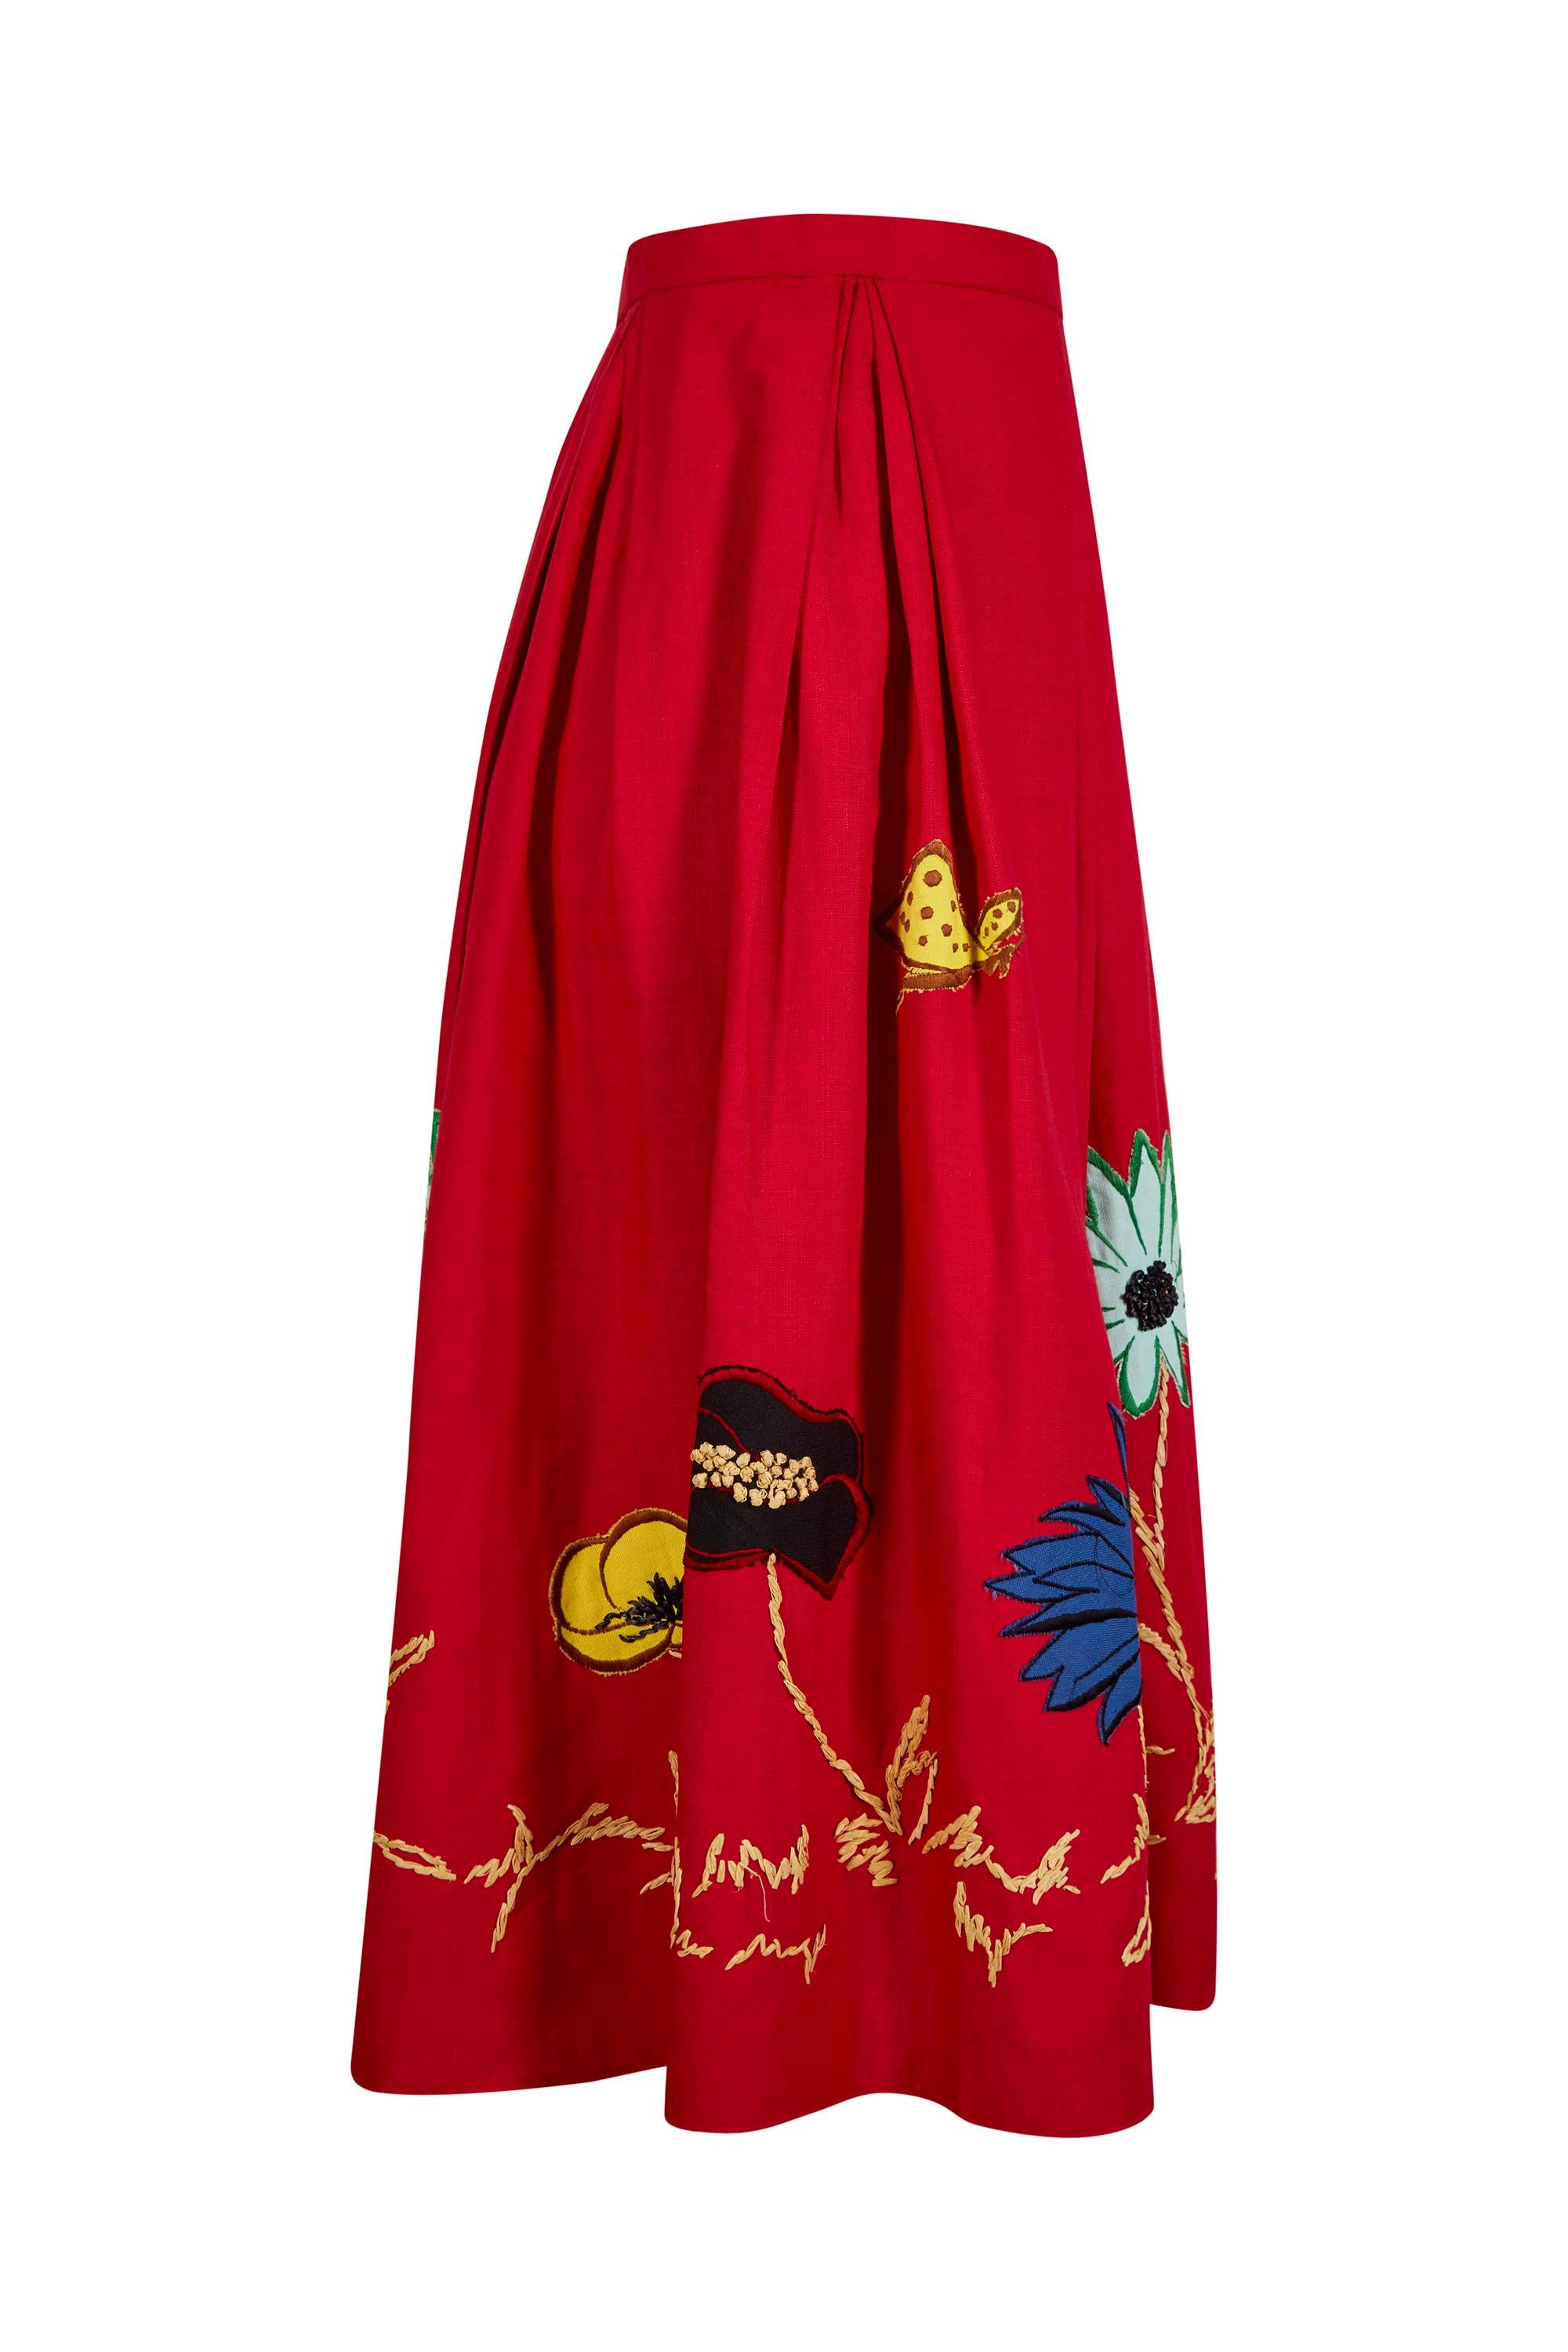 This vivacious 1950s red cotton skirt with large floral appliqué detail is from an unknown designer and is in excellent vintage condition having retained all of its vibrancy with a playful, contemporary aesthetic. 

The bold appliqué floral design